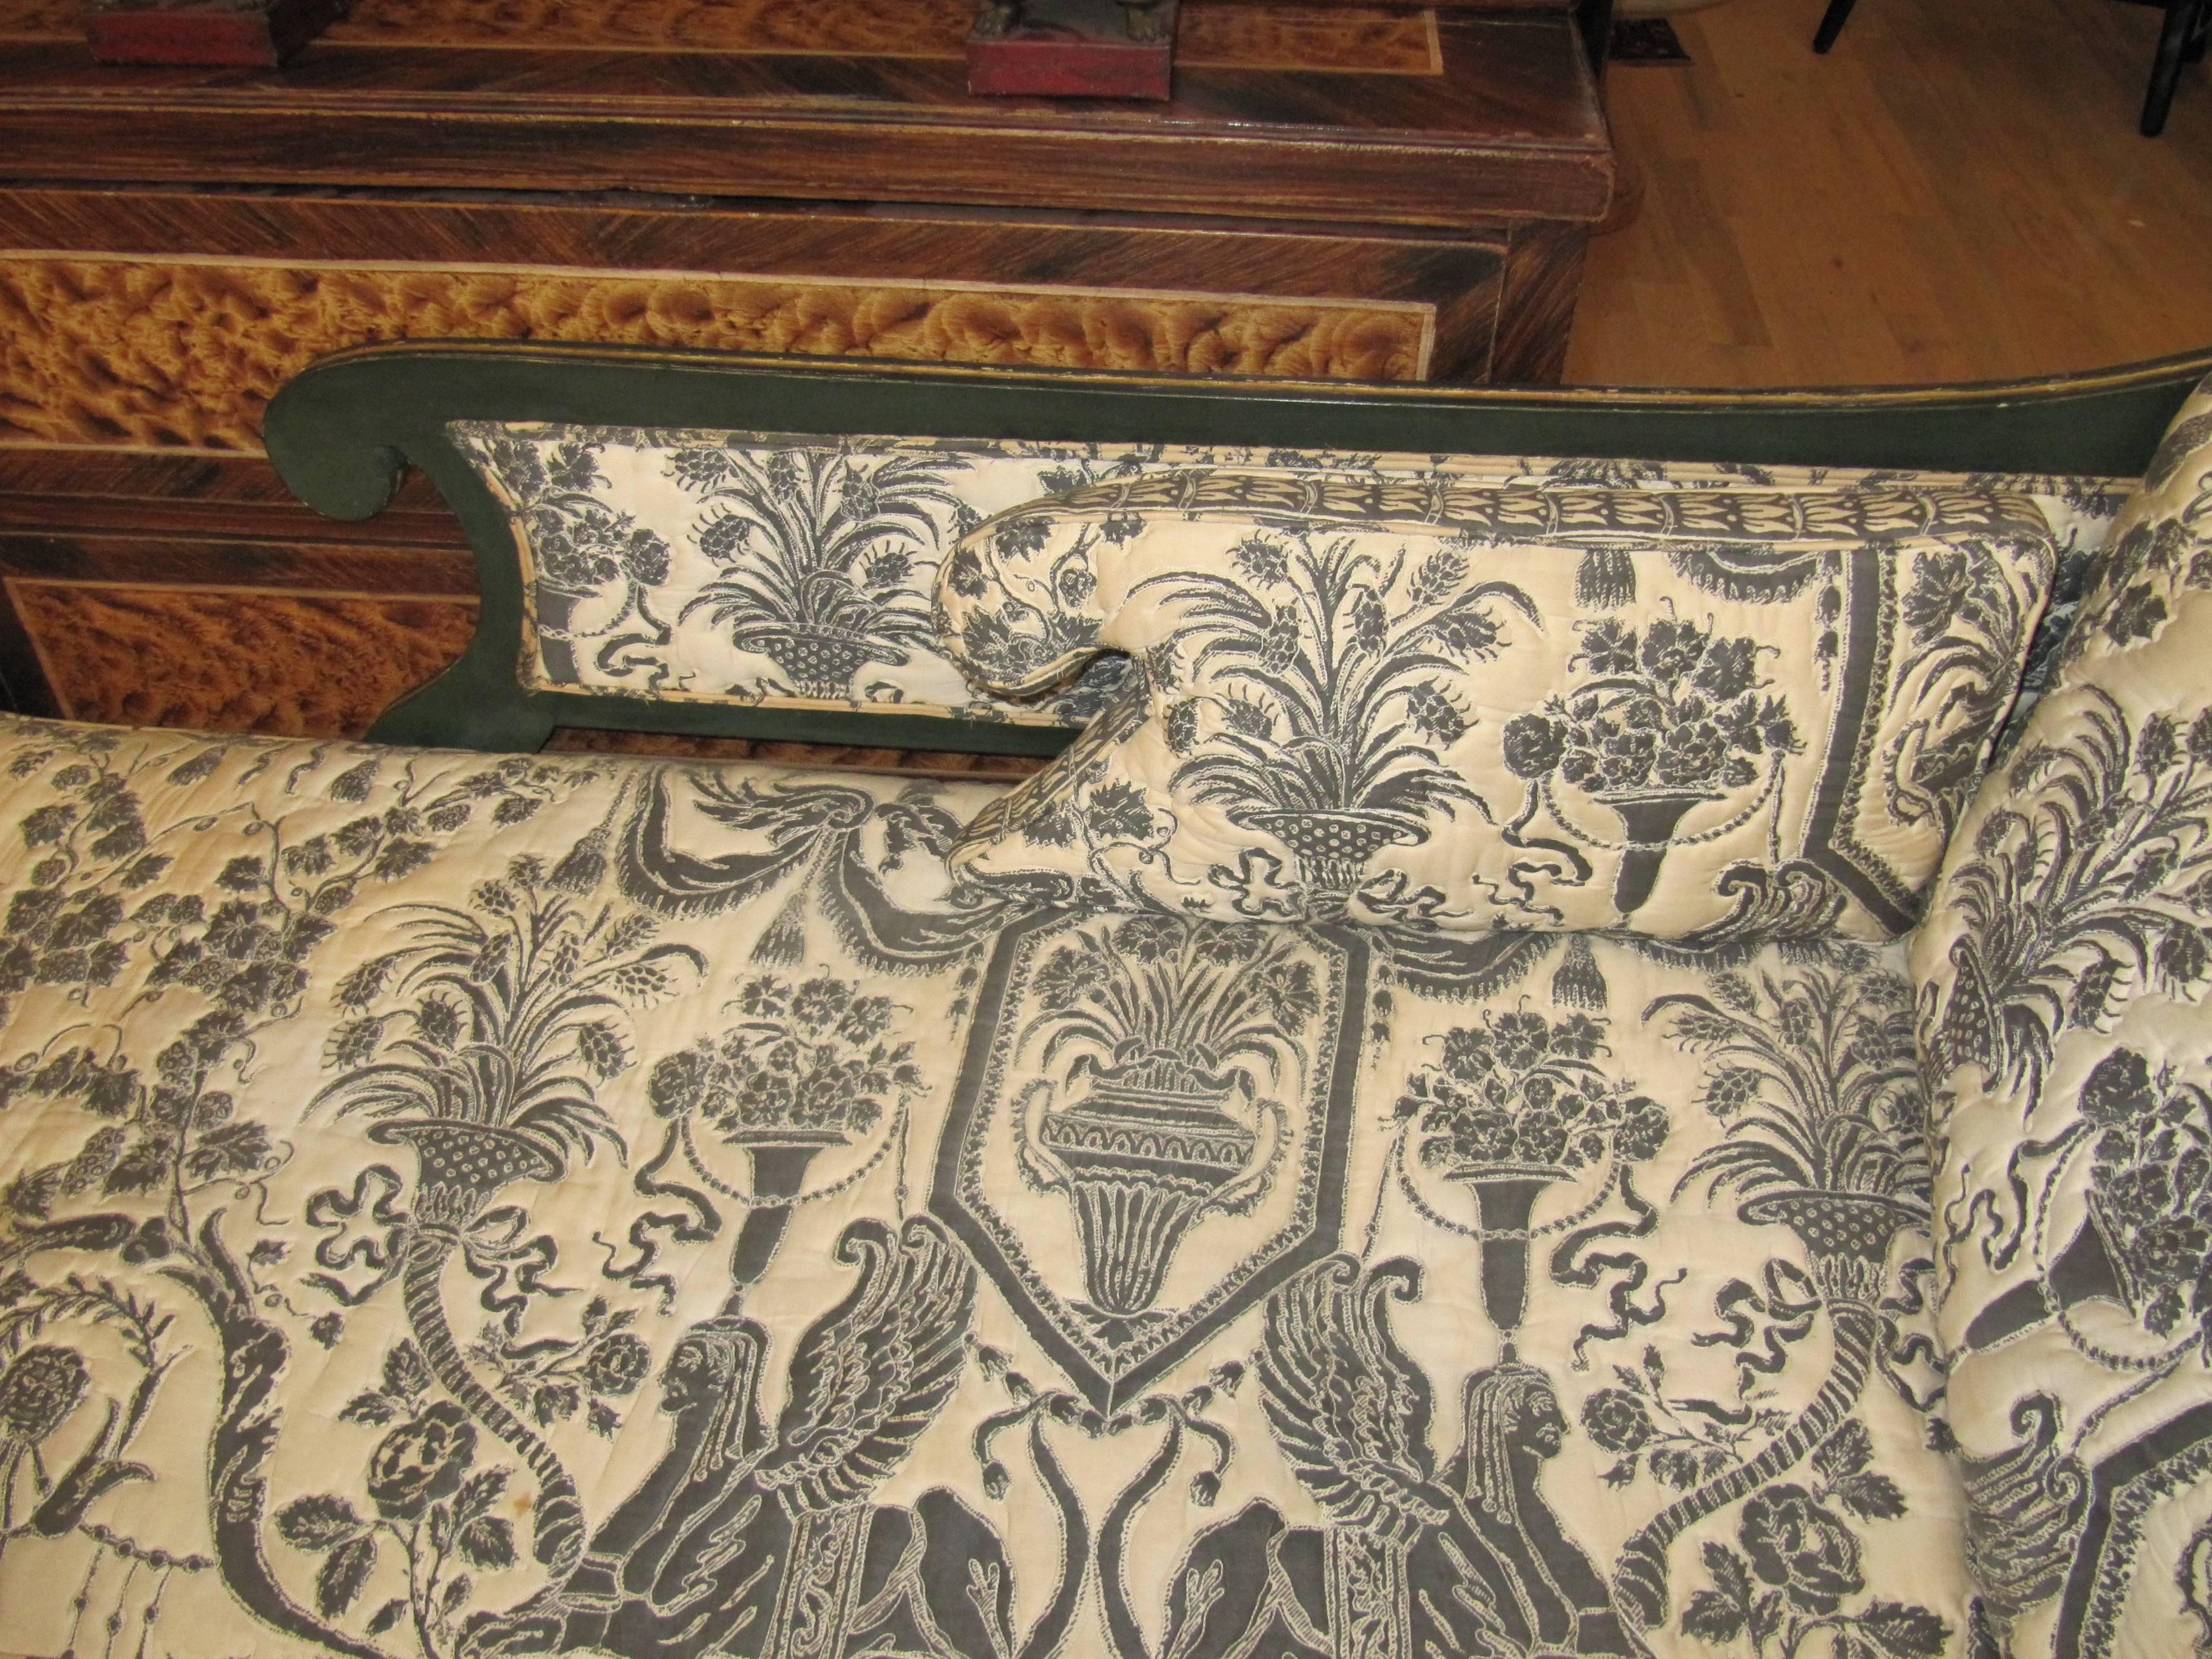 Charming Early 19th Century Regency Chaise Longues with Painted Decoration im Zustand „Hervorragend“ in Buchanan, MI